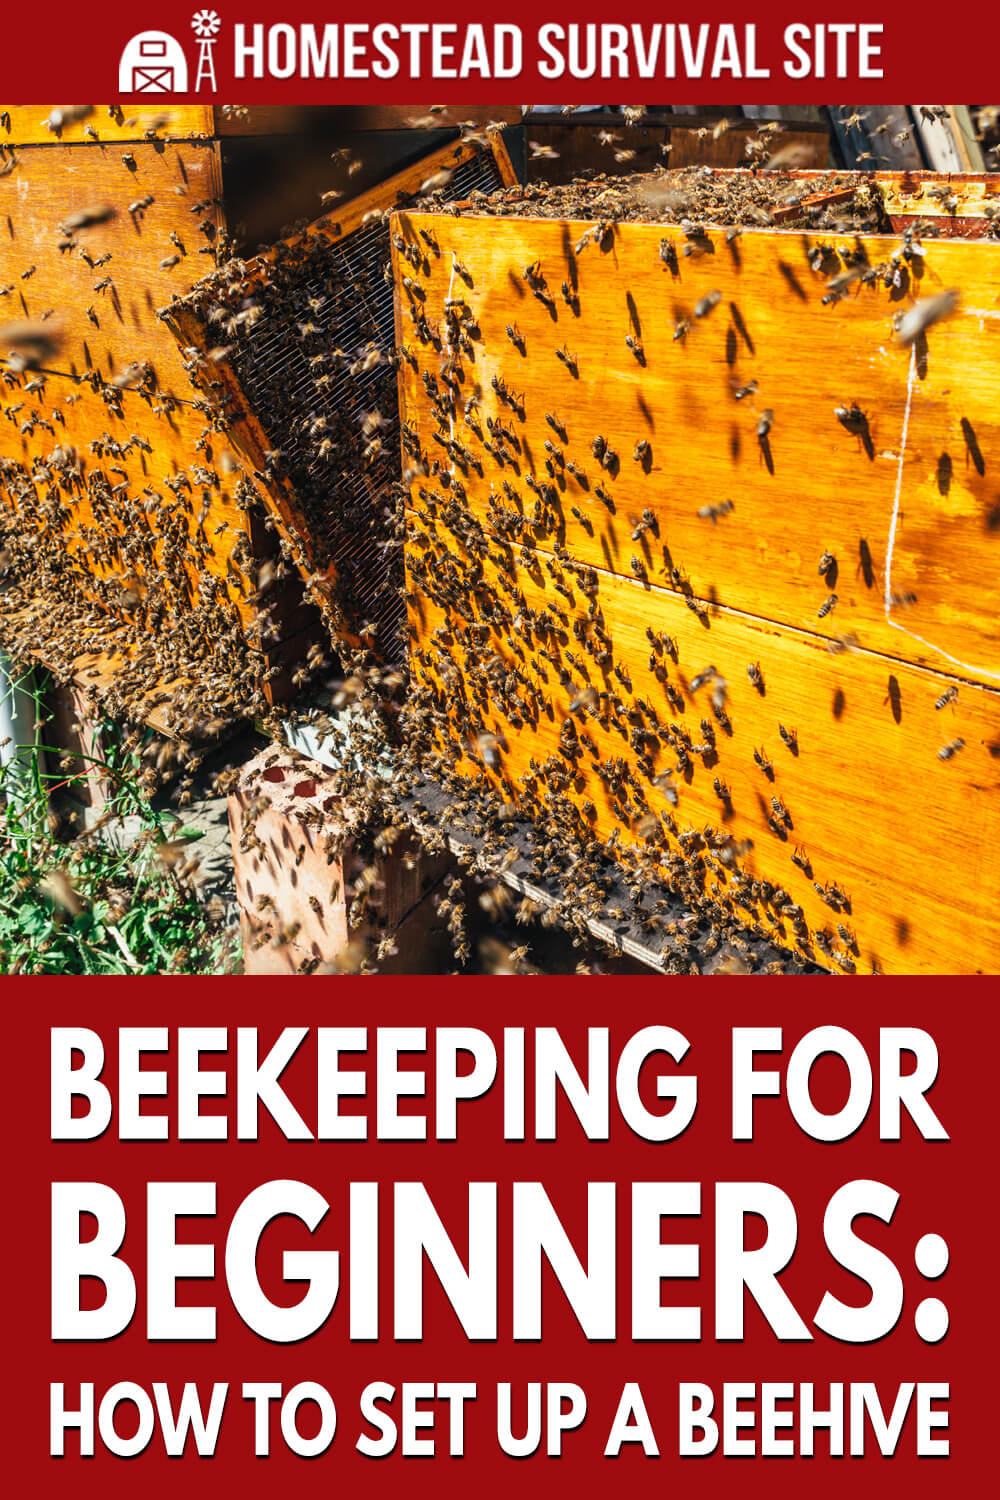 Beekeeping for Beginners: How To Set Up A Beehive